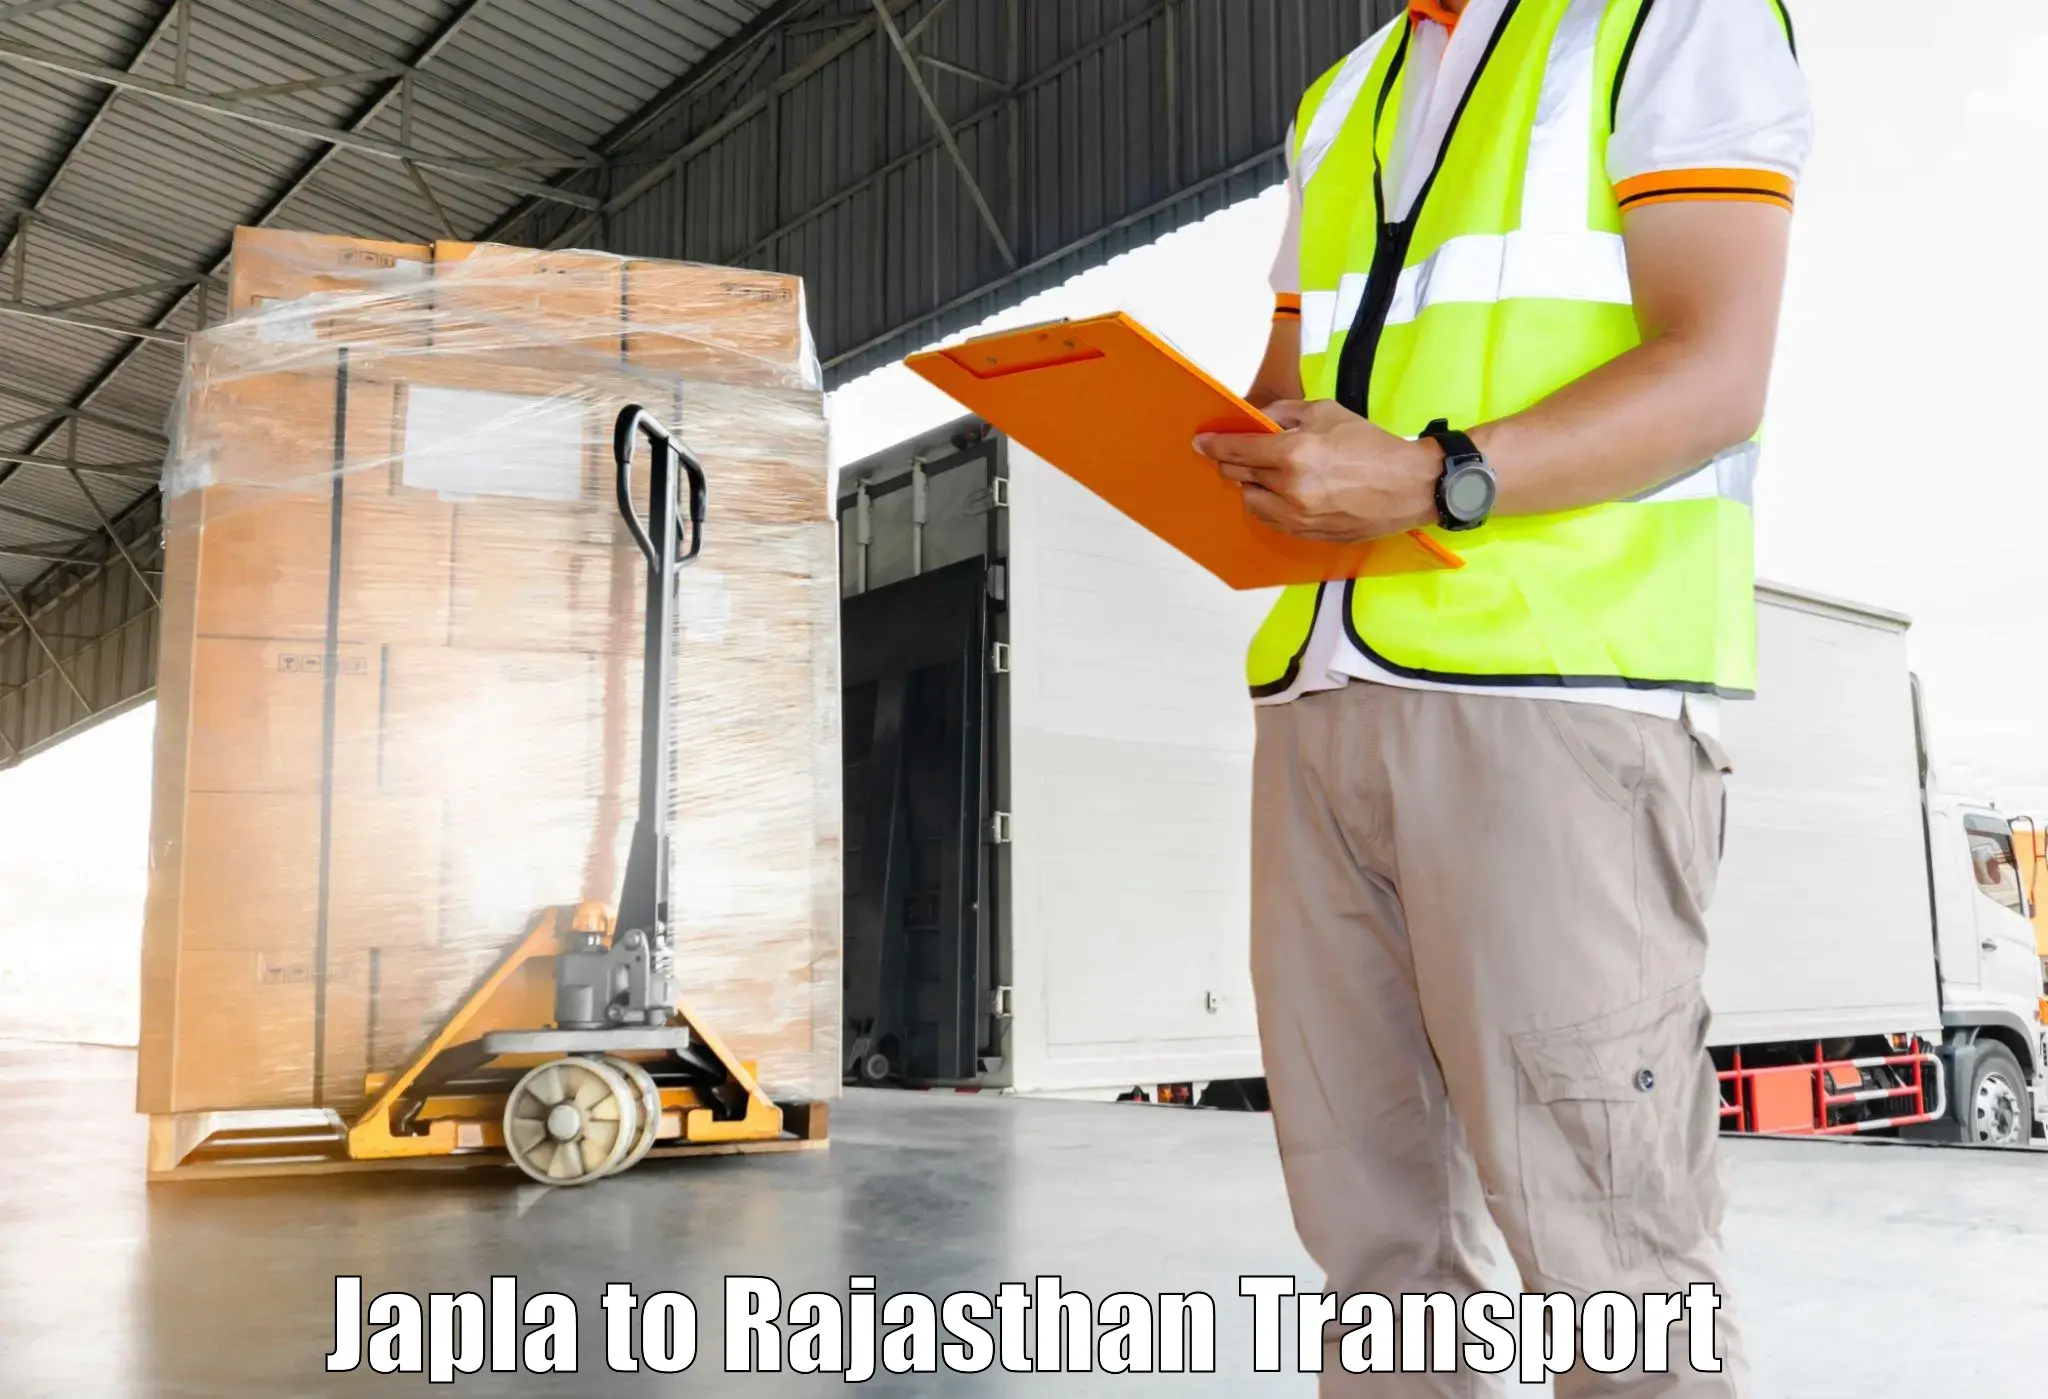 Transport shared services Japla to Piparcity